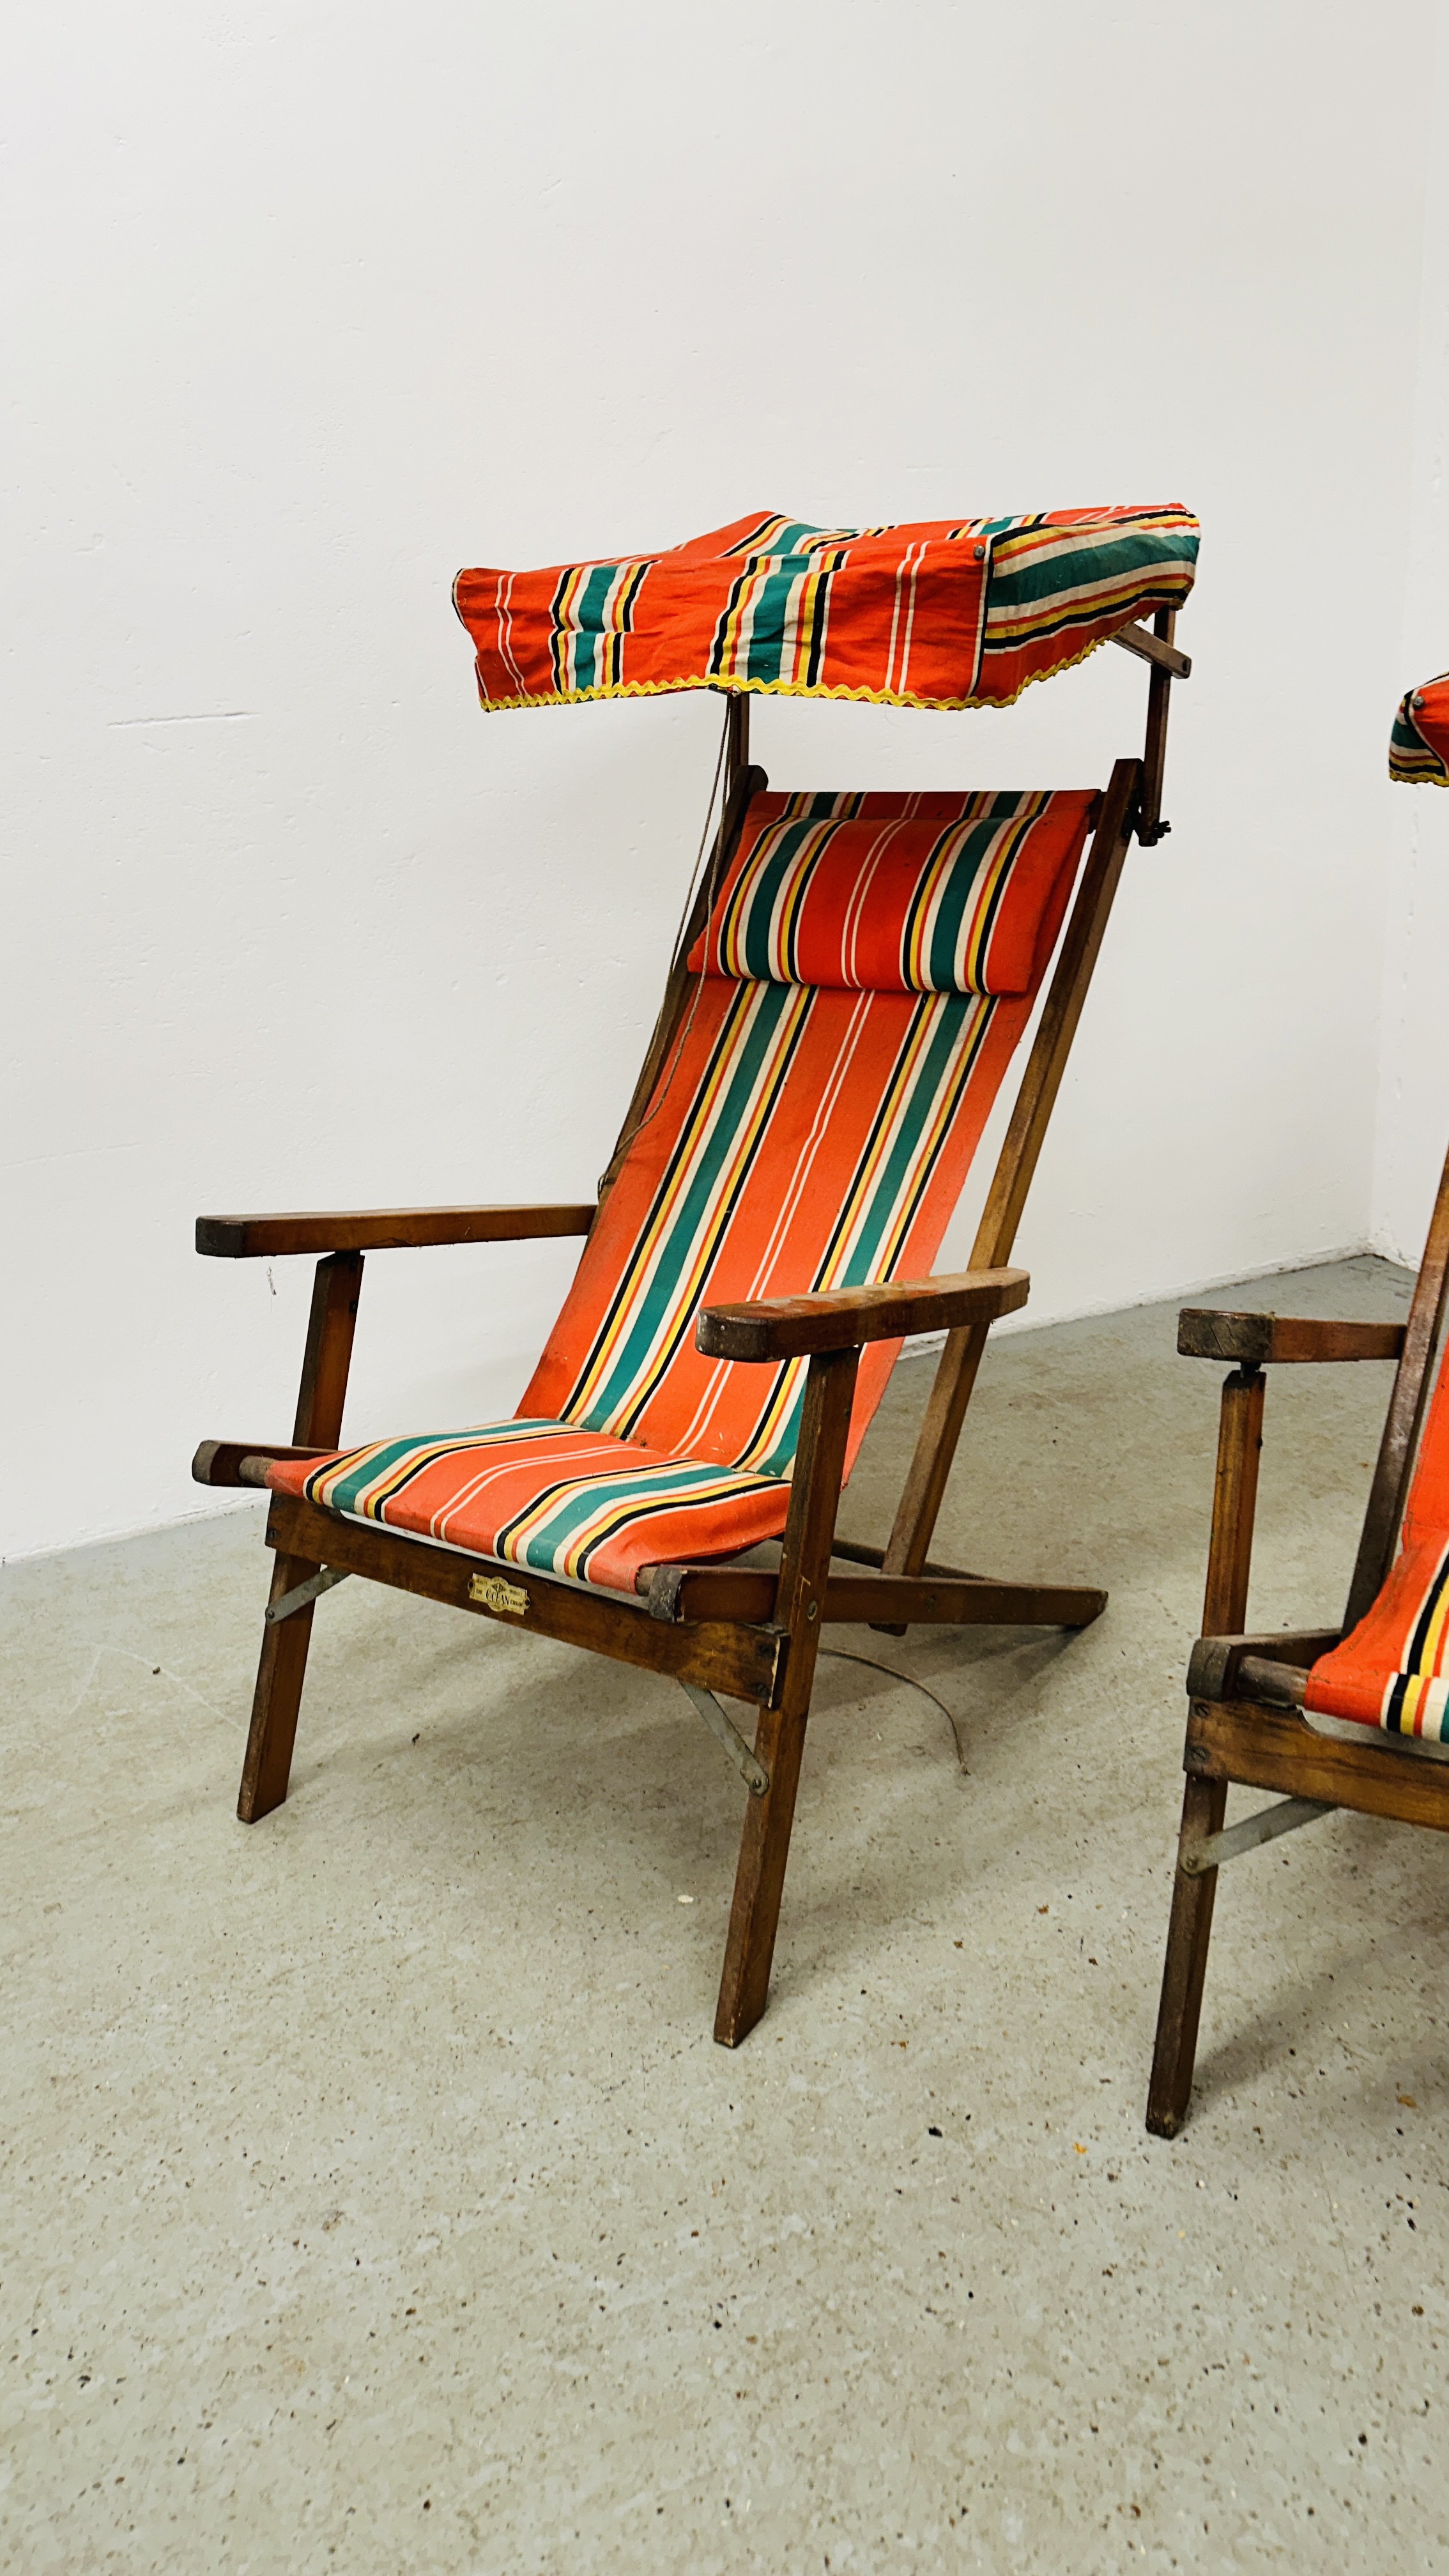 A PAIR OF GEEBRO "THE OCEAN CHAIR" DECK CHAIRS WITH SUN SHADES. - Image 2 of 13